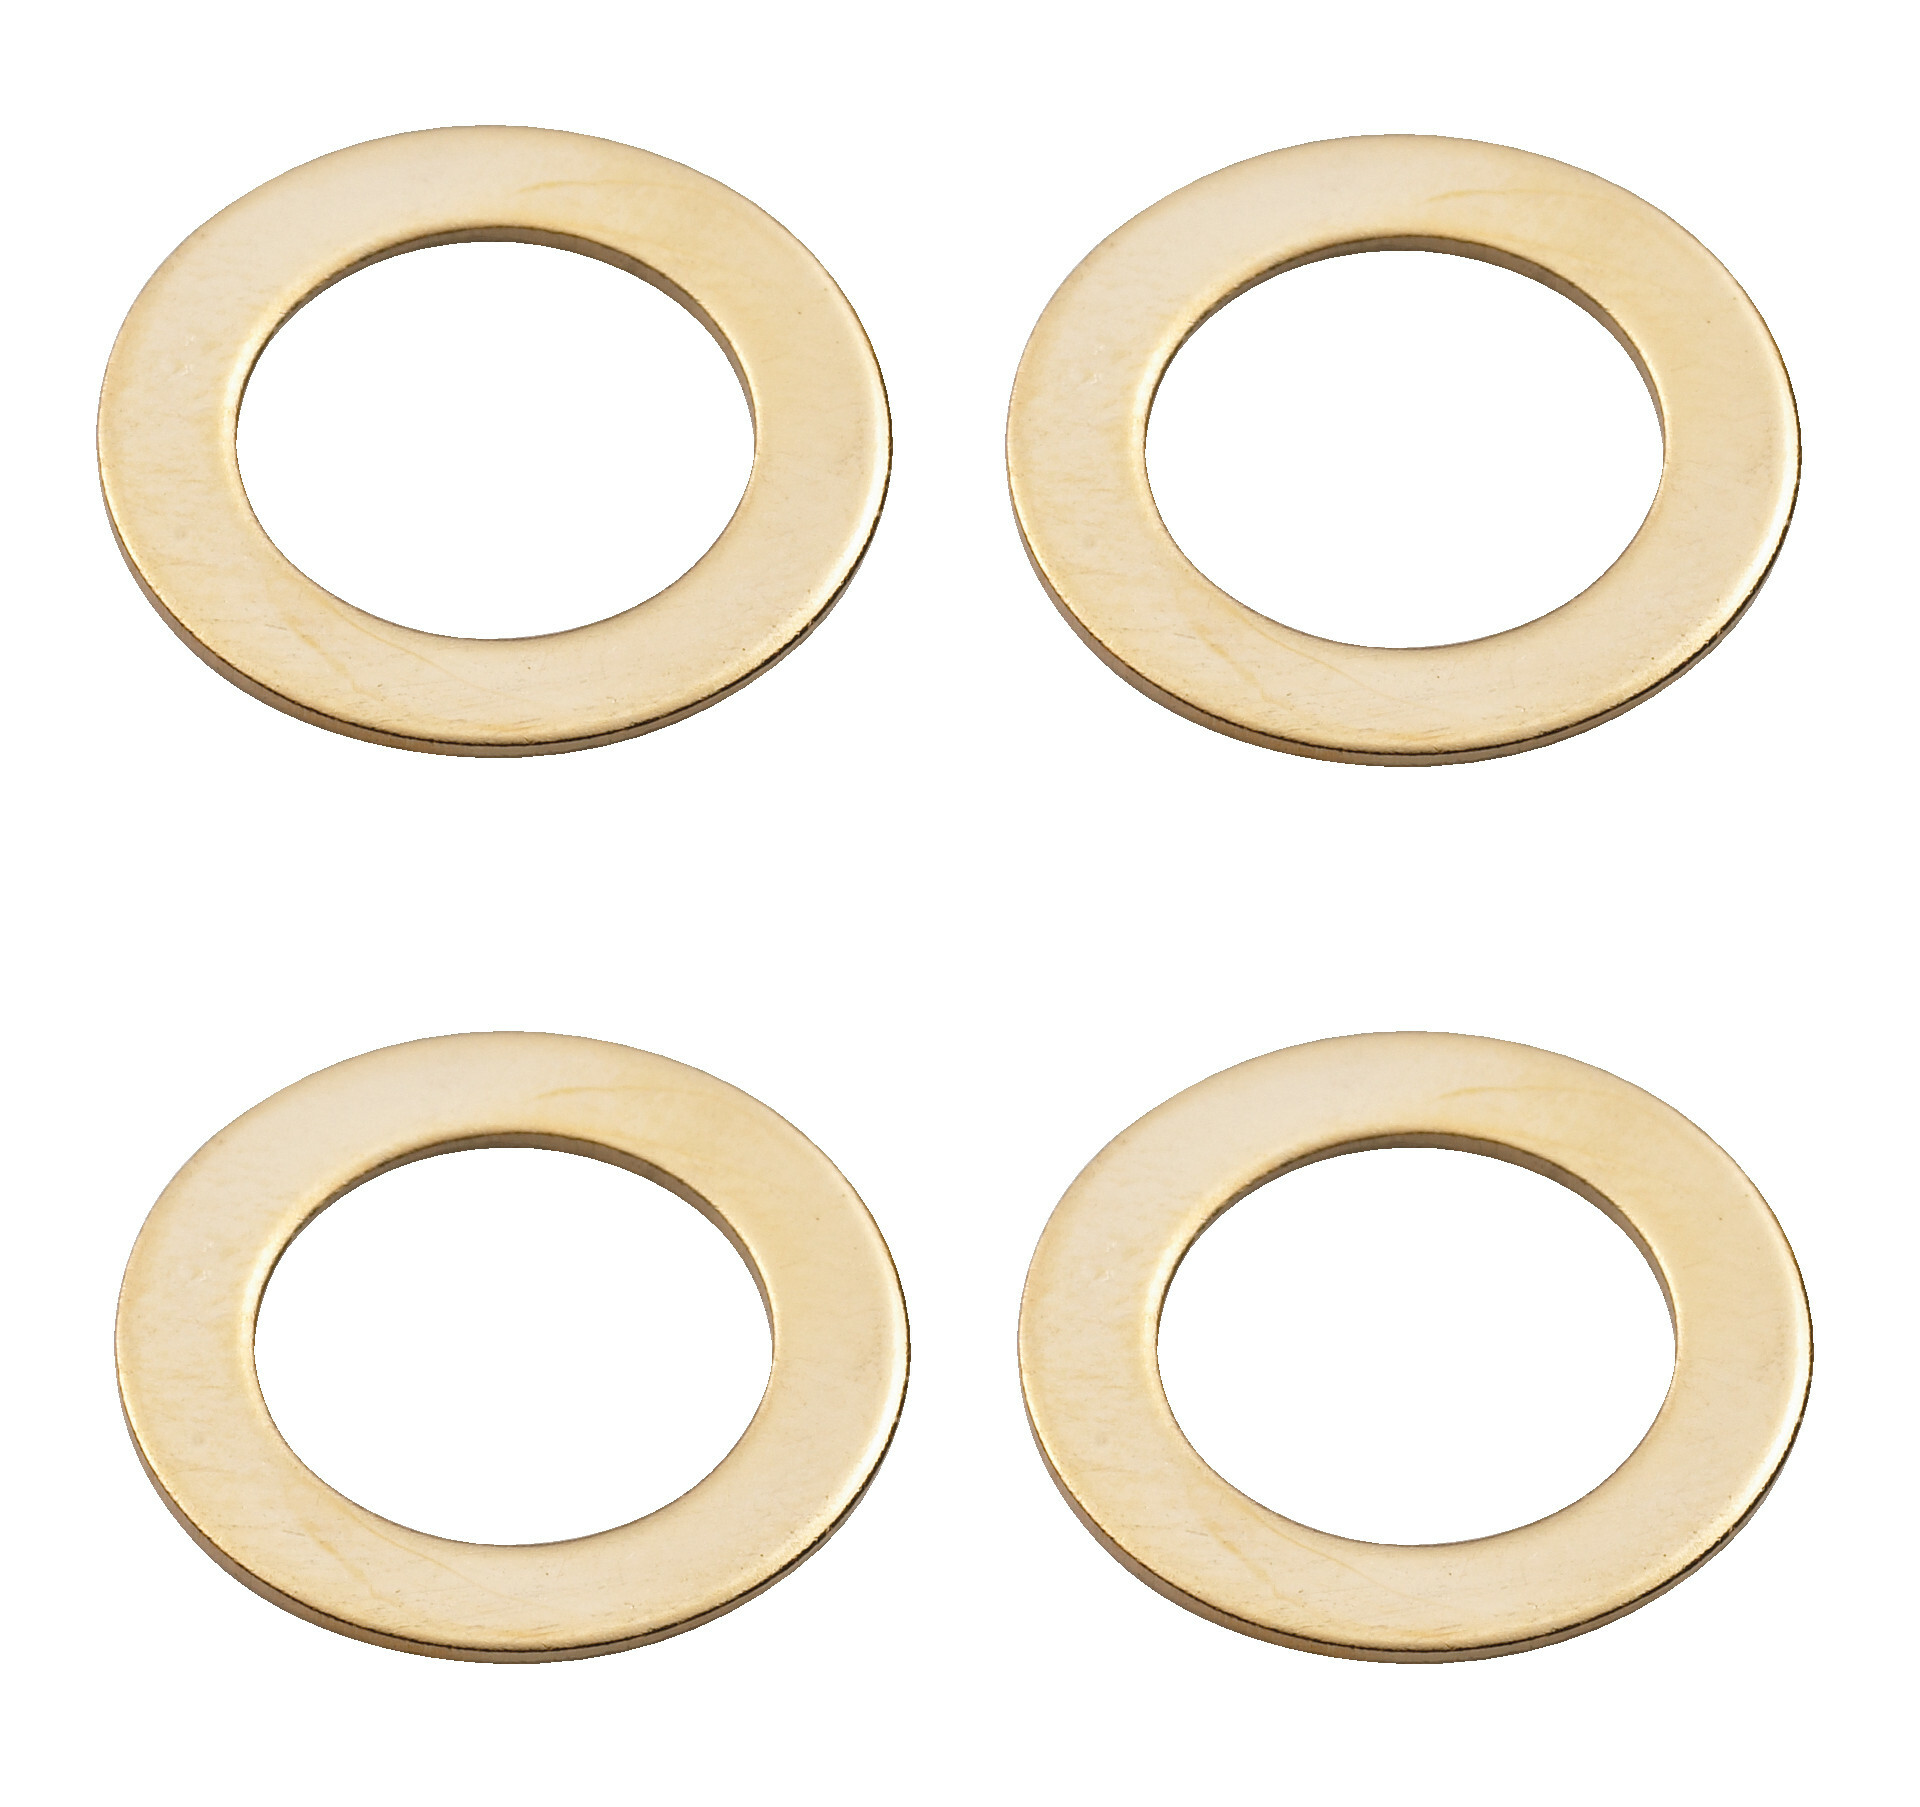 Framus & Warwick Parts - Washer for Potentiometers - Gold, 4 pcs.